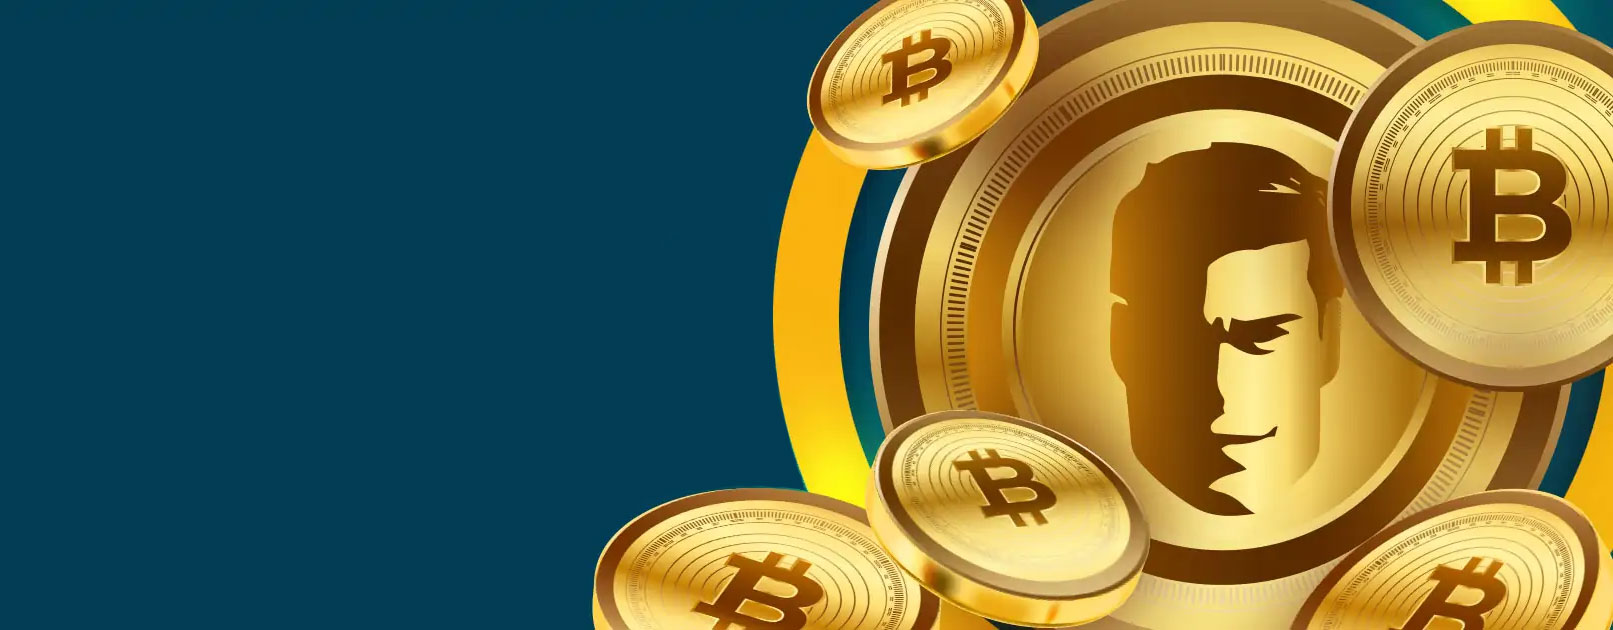 bitcoin live casino Like A Pro With The Help Of These 5 Tips